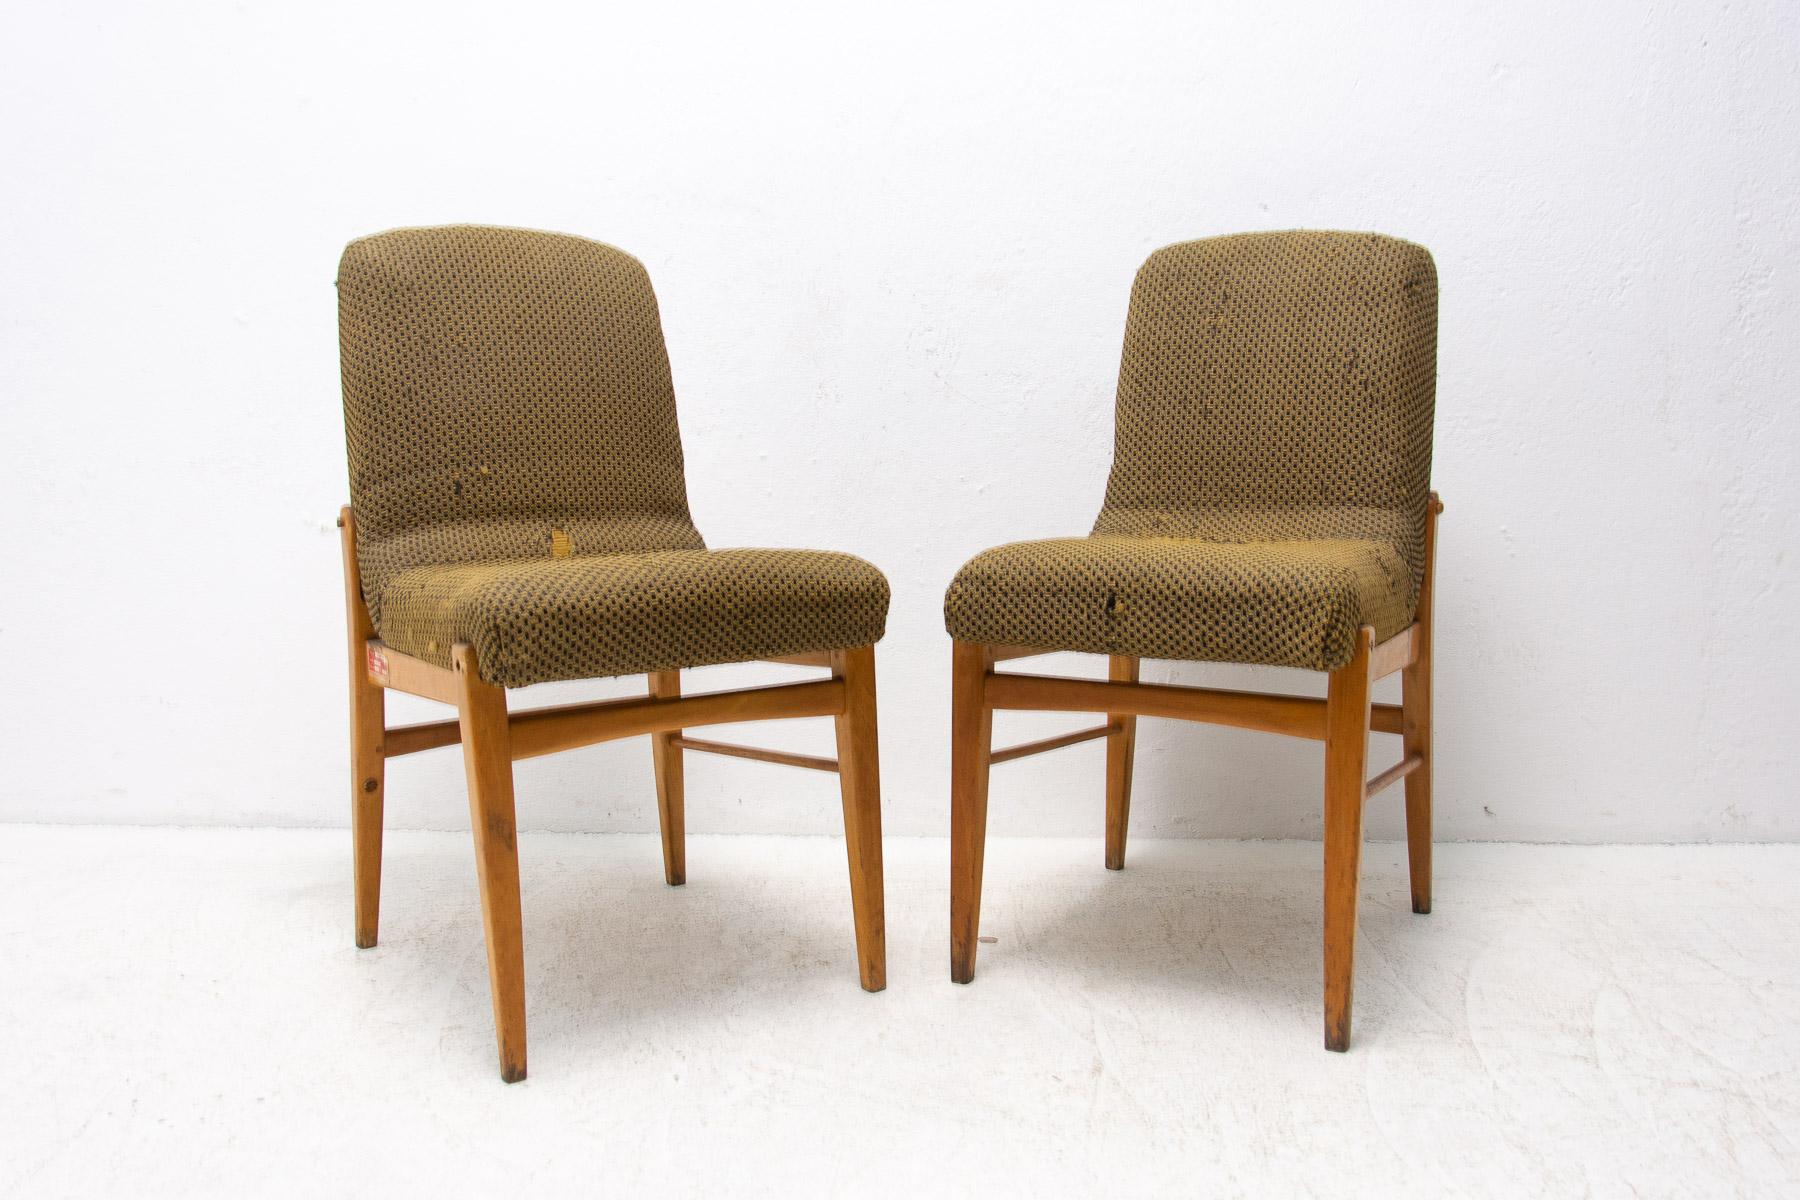 An upholstered dining chairs, made in the former Czechoslovakia in the 1960s. The chairs are constructed of beech wood. Very interesting shaping. The upholstery shows significant signs of age and using and would need to be reupholstered .